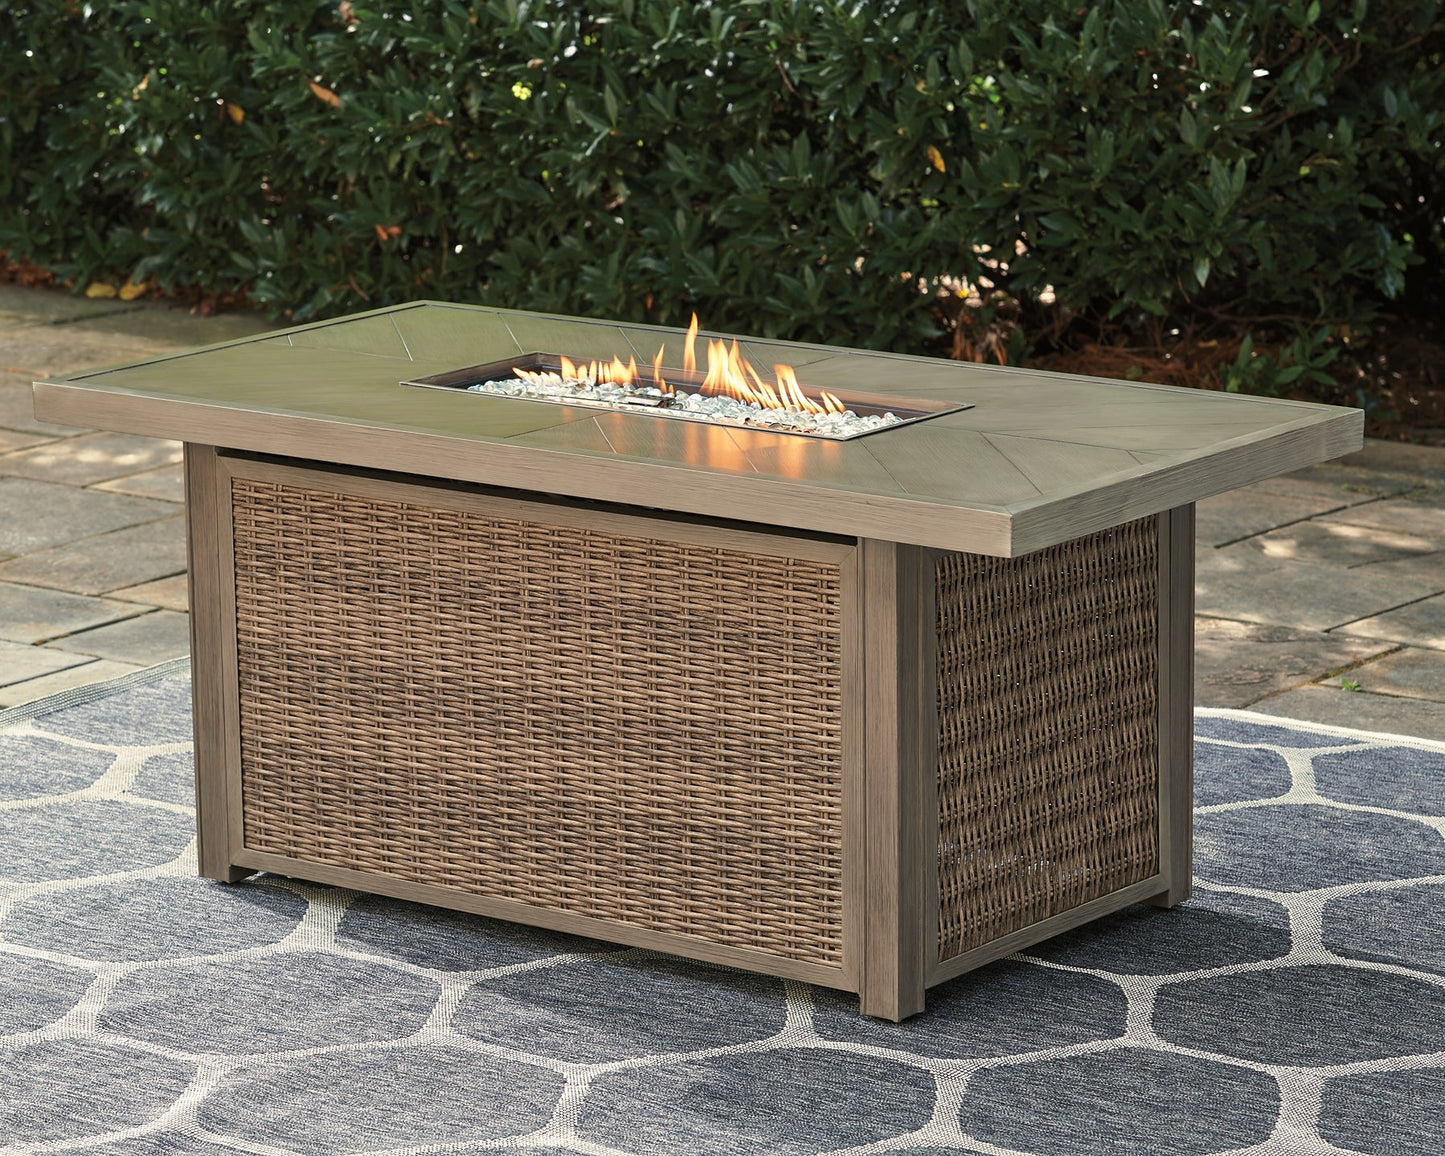 Beachcroft Rectangular Fire Pit Table Rent Wise Rent To Own Jacksonville, Florida